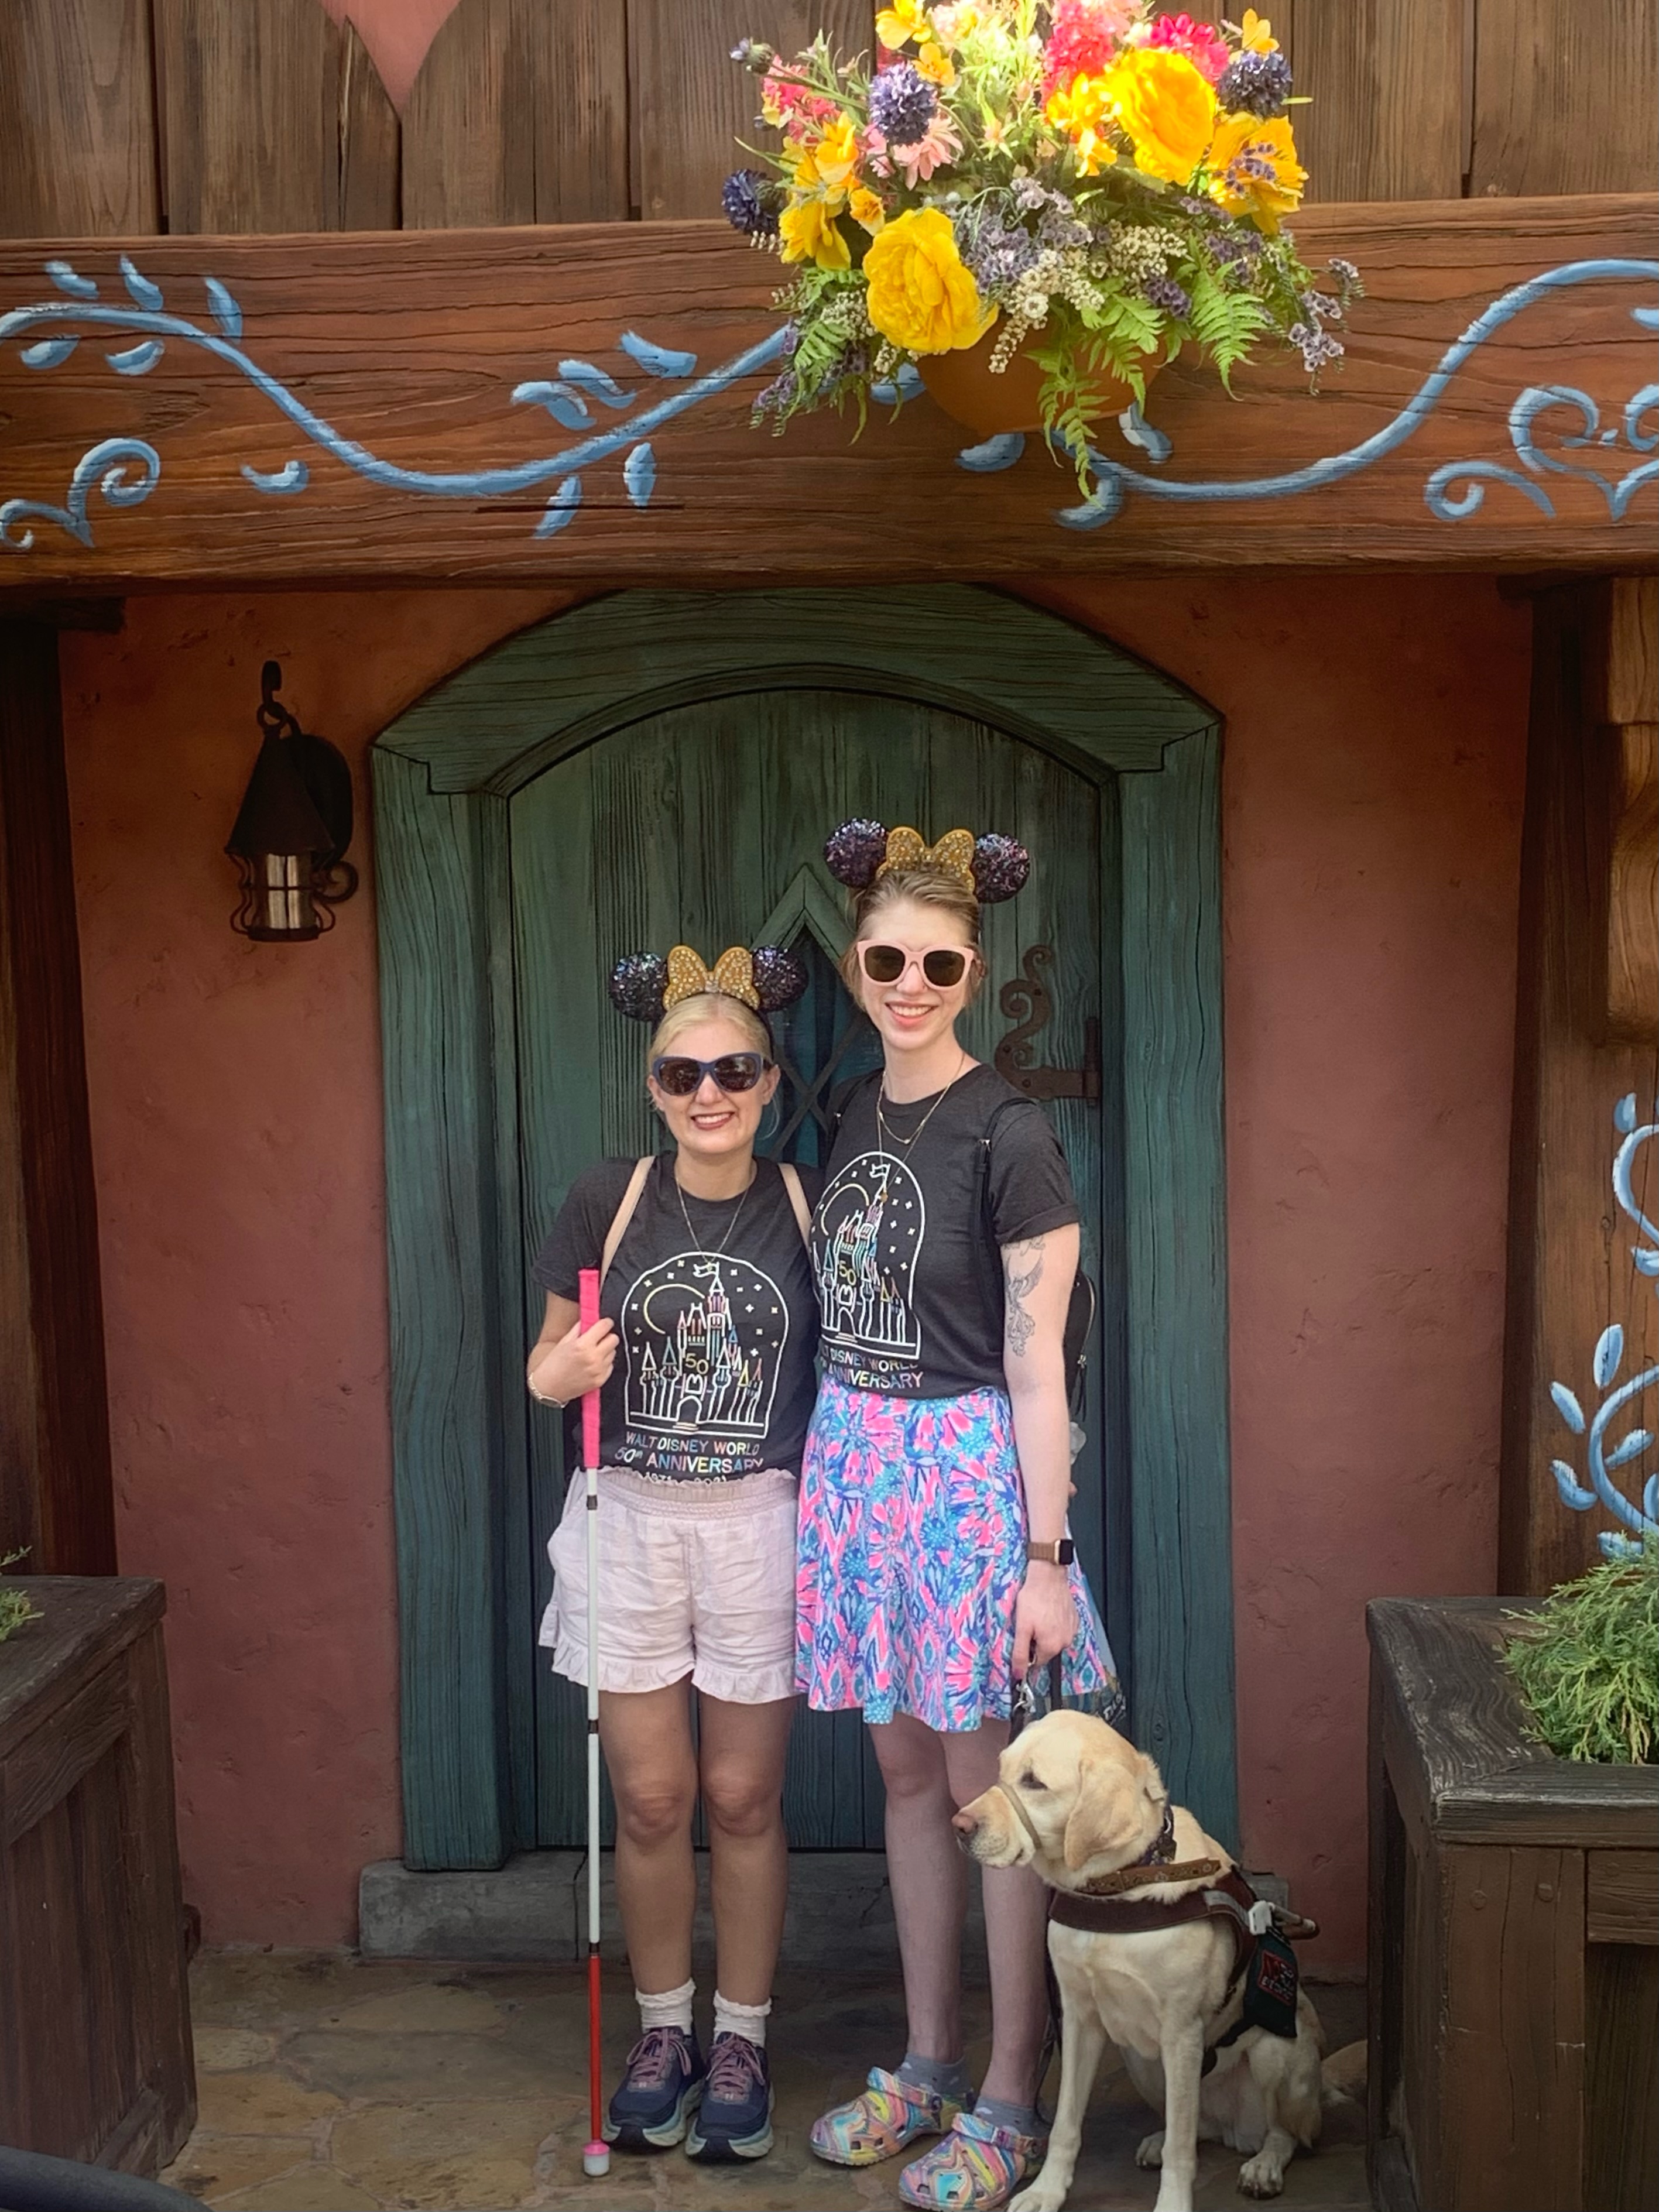 photo of casey and cassandra in disney world in front of a wood painted wall. they wear matching gray tshirts and sunglasses, and both s,i le at the camera. cass’ yellow lab guide dog romana looks off to the left